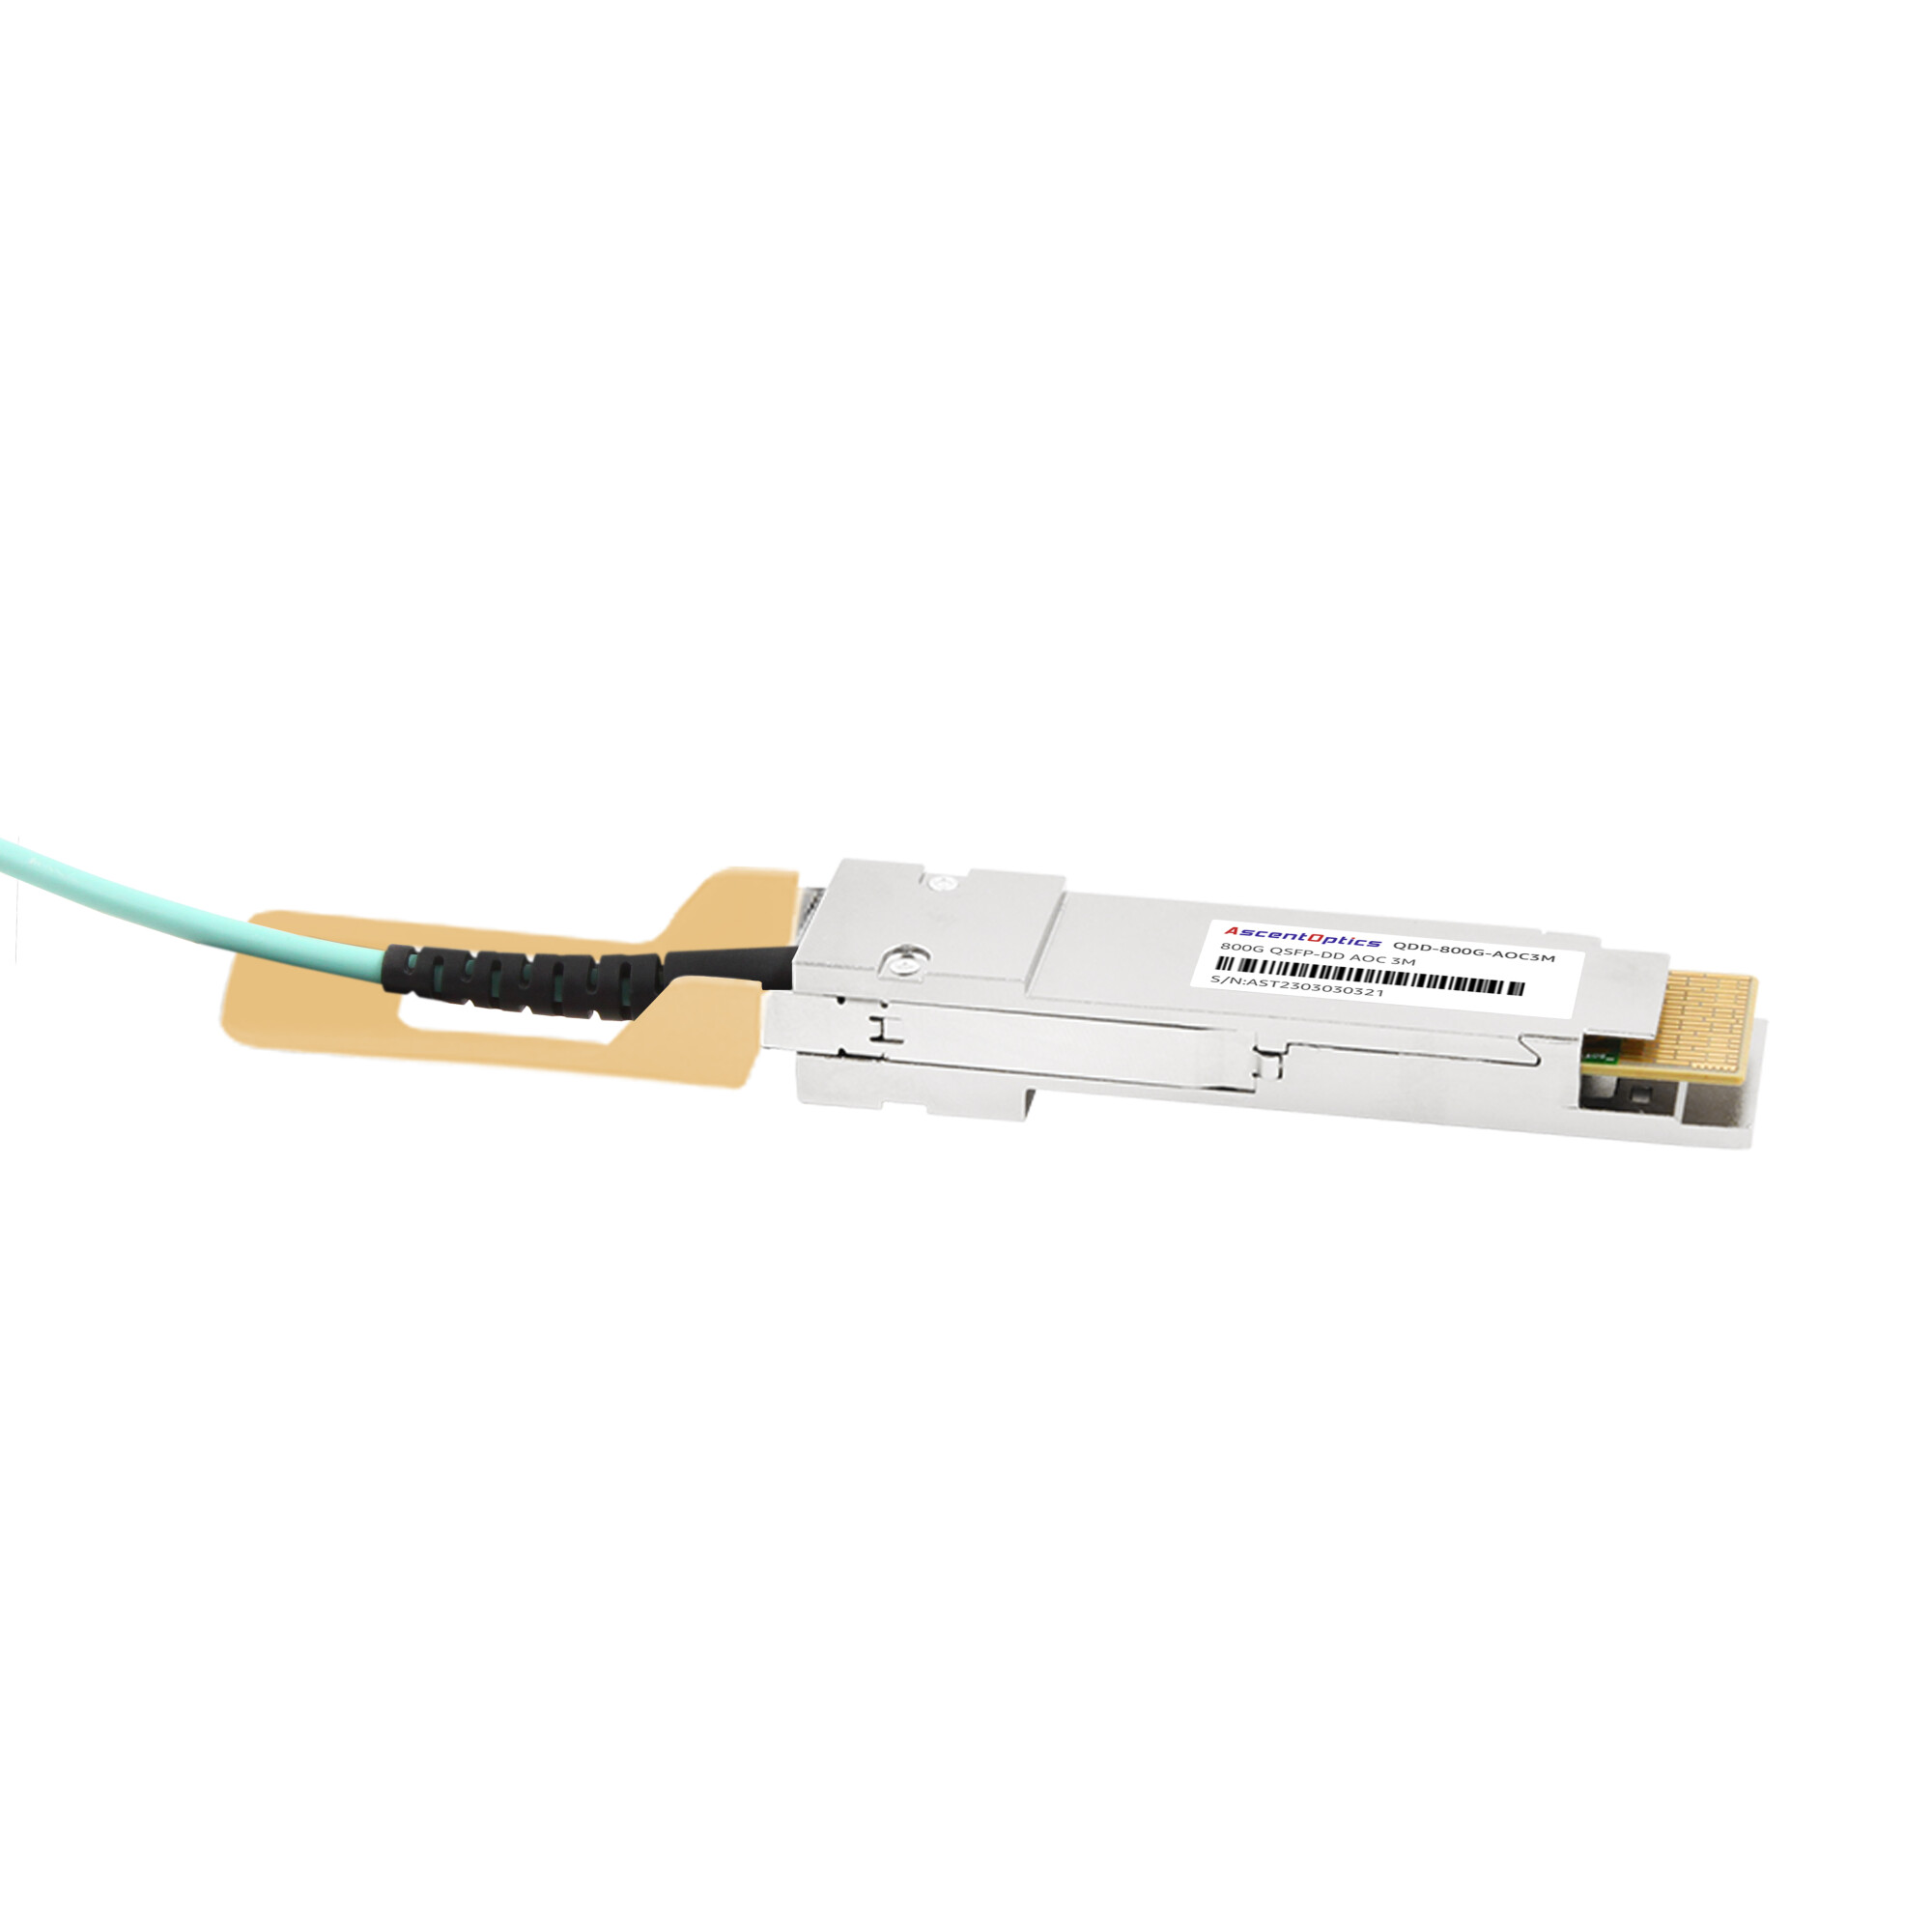 800G QSFP-DD Active Optical Cable,3 Meters